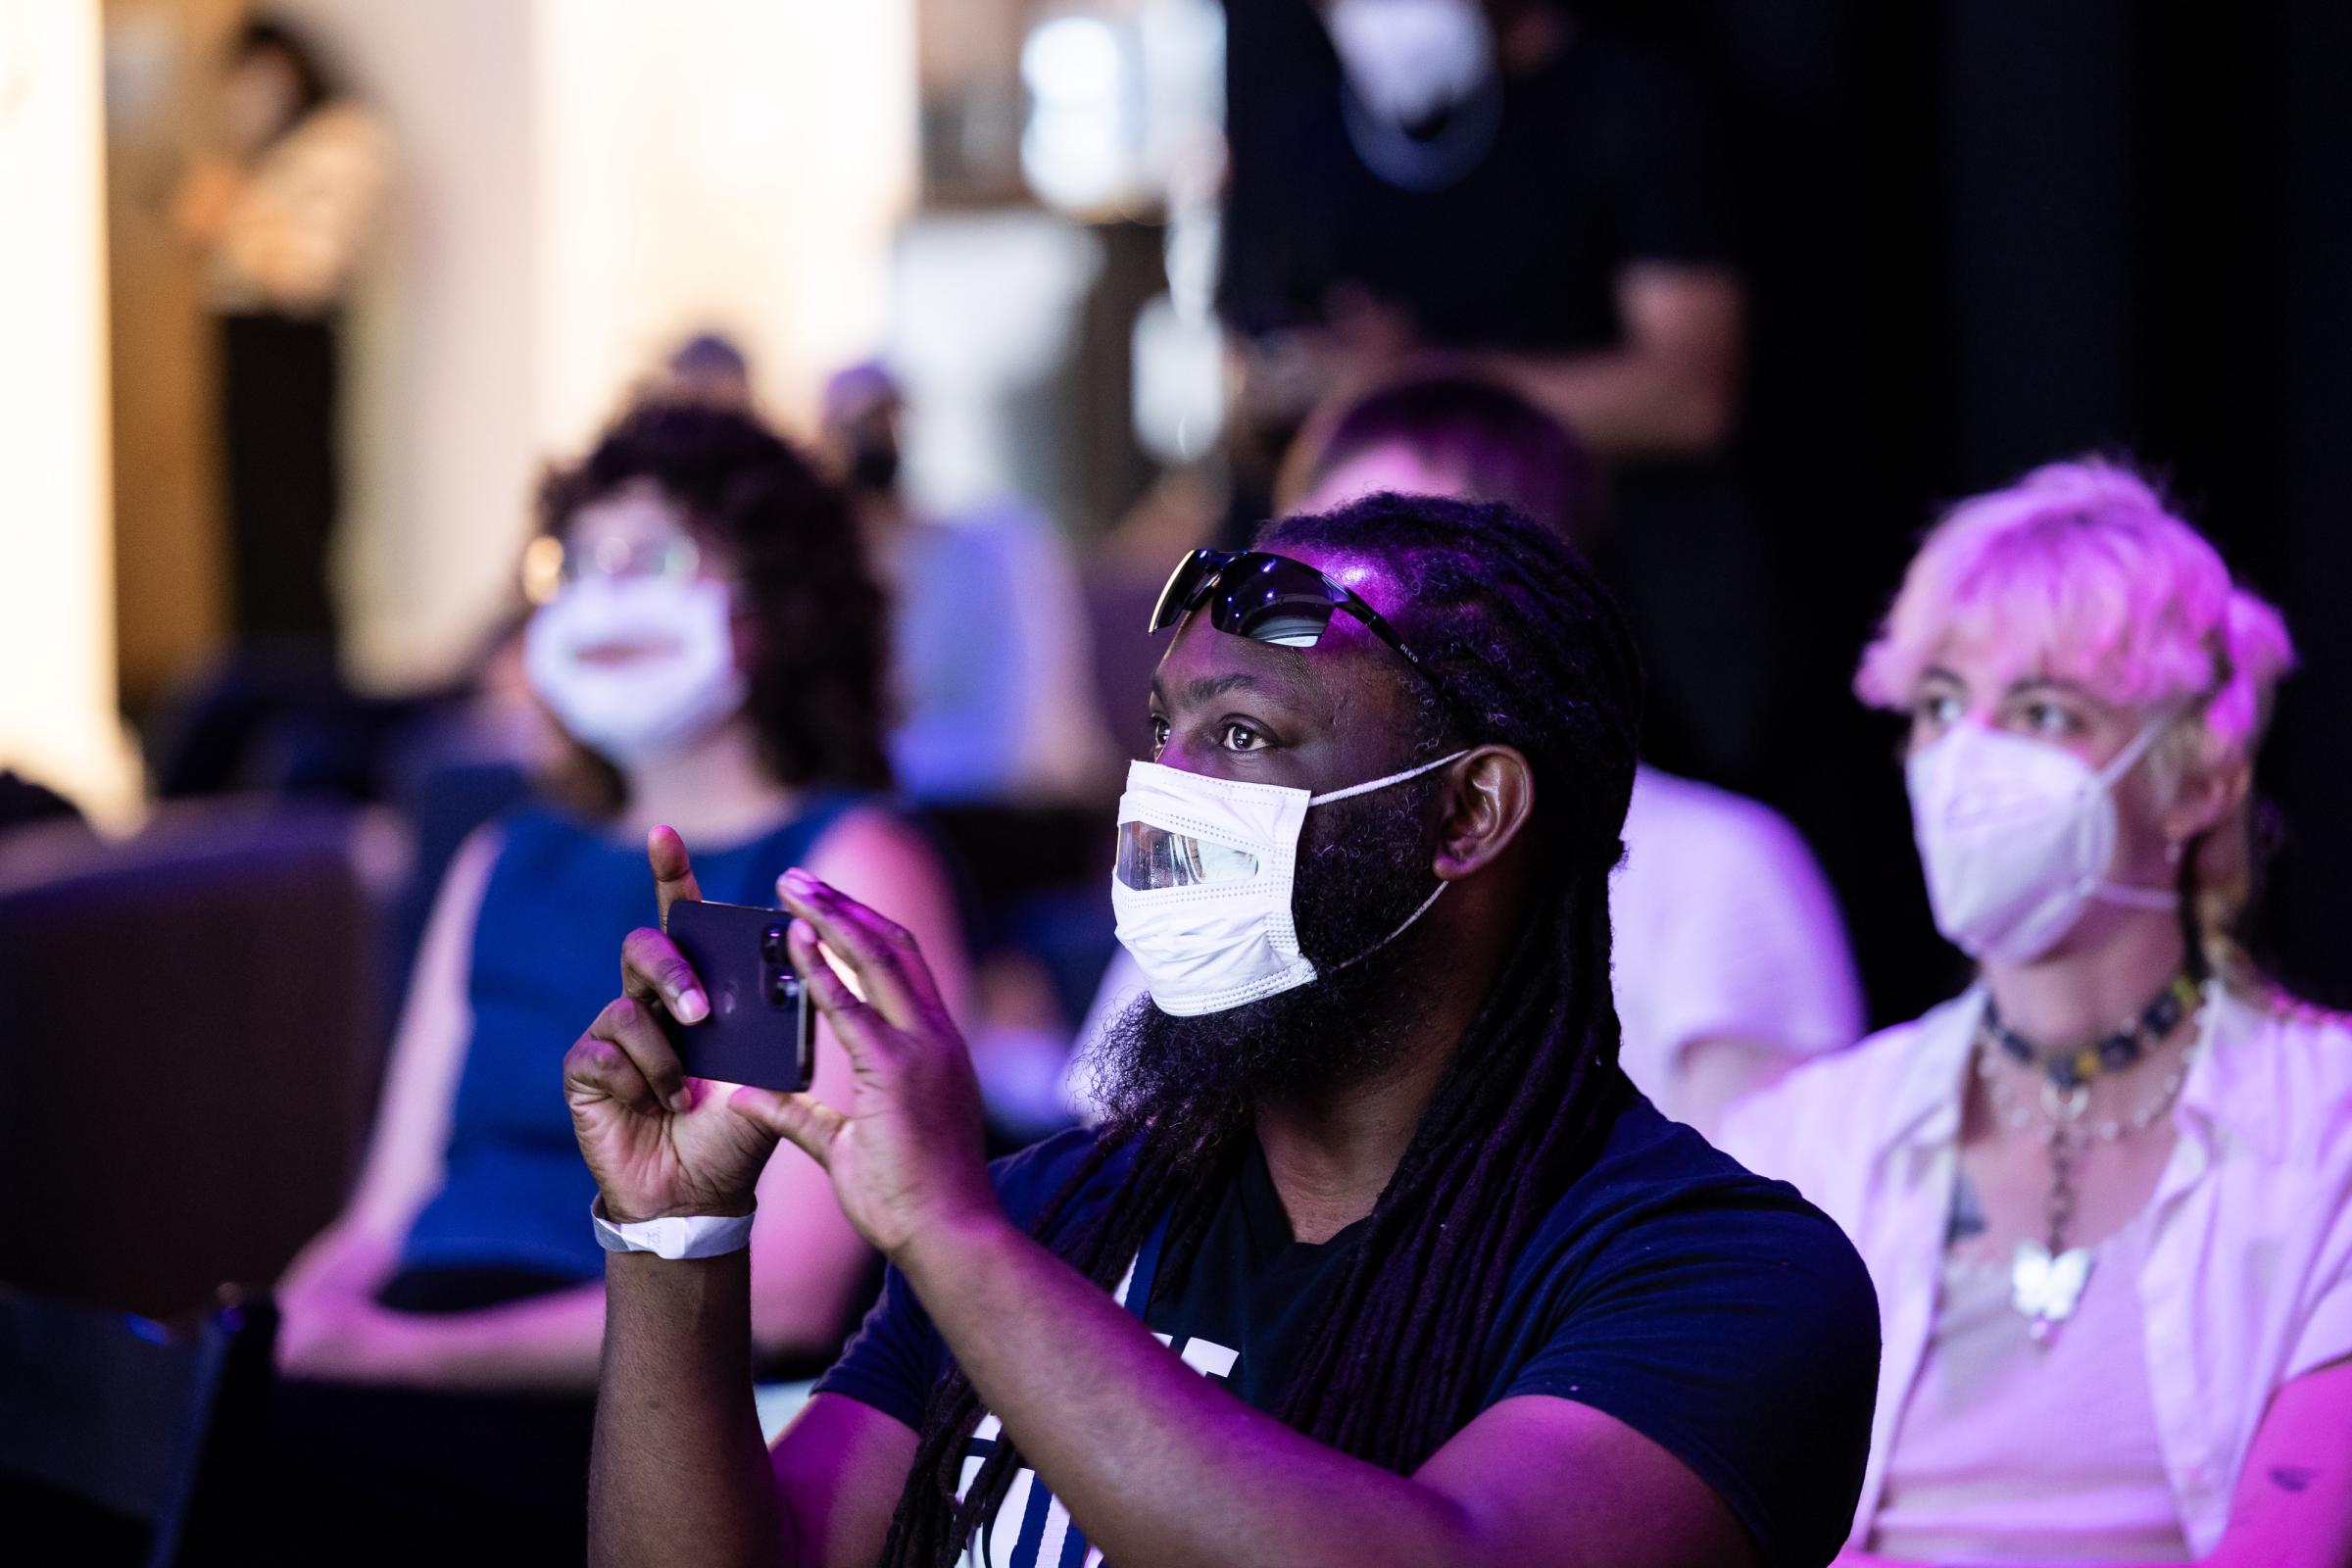 Male presenting individual with black hair is taking a video landscape style. Has sunglasses on the top of their face and is wearing a white mask with a clear window in front. Behind is other audience members. 